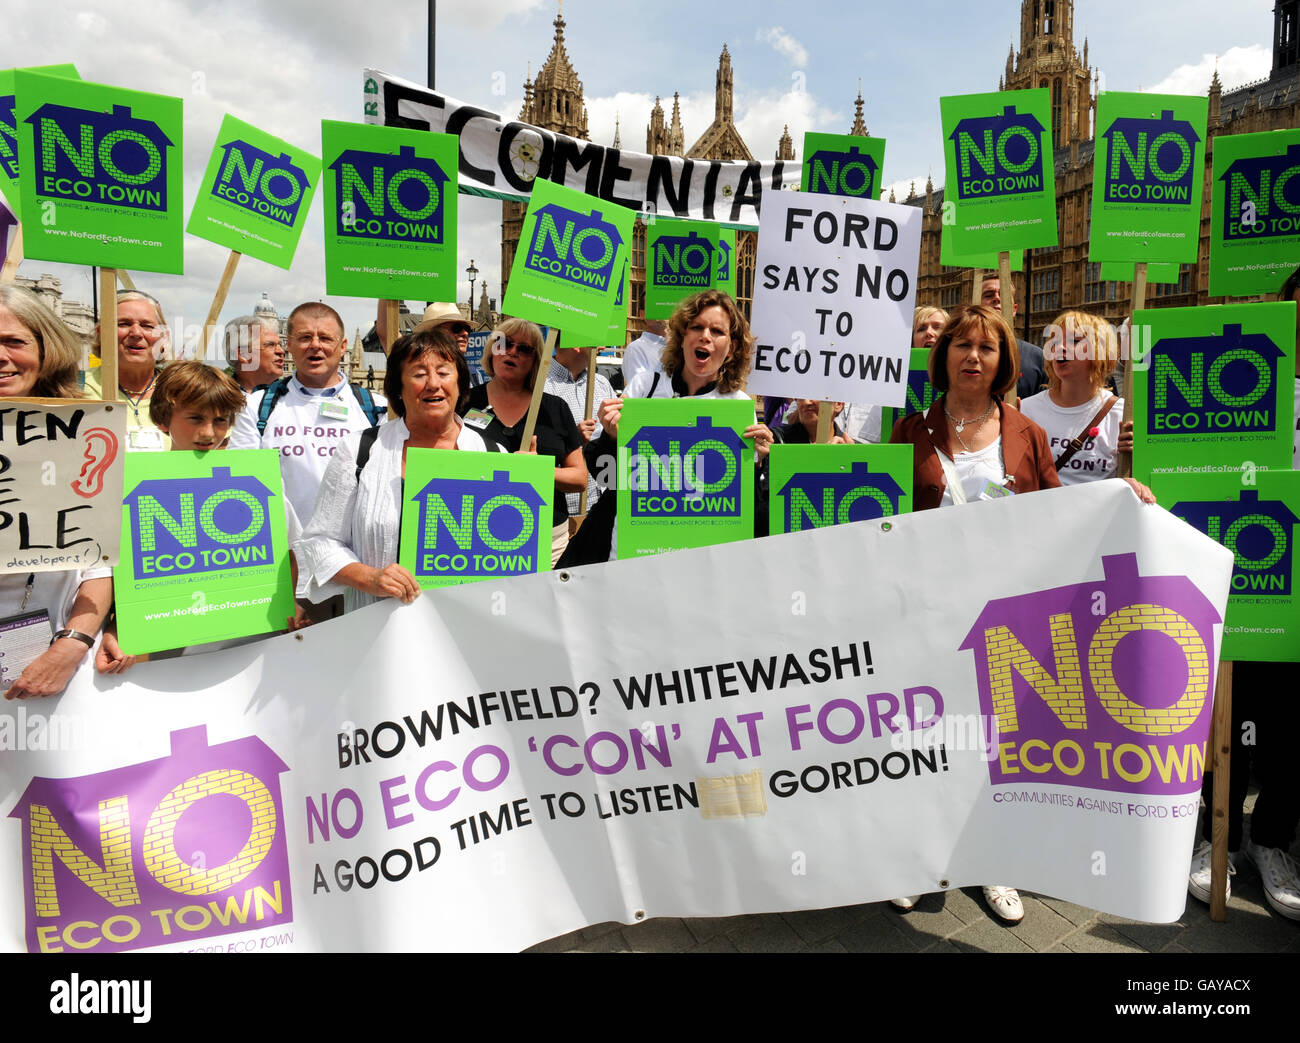 A group of protesters from Ford, Climping, Yapton and Walberton, outside the Houses of Parliament, in London, voice their opposition for plans to build new eco-towns in their county of West Sussex. Stock Photo